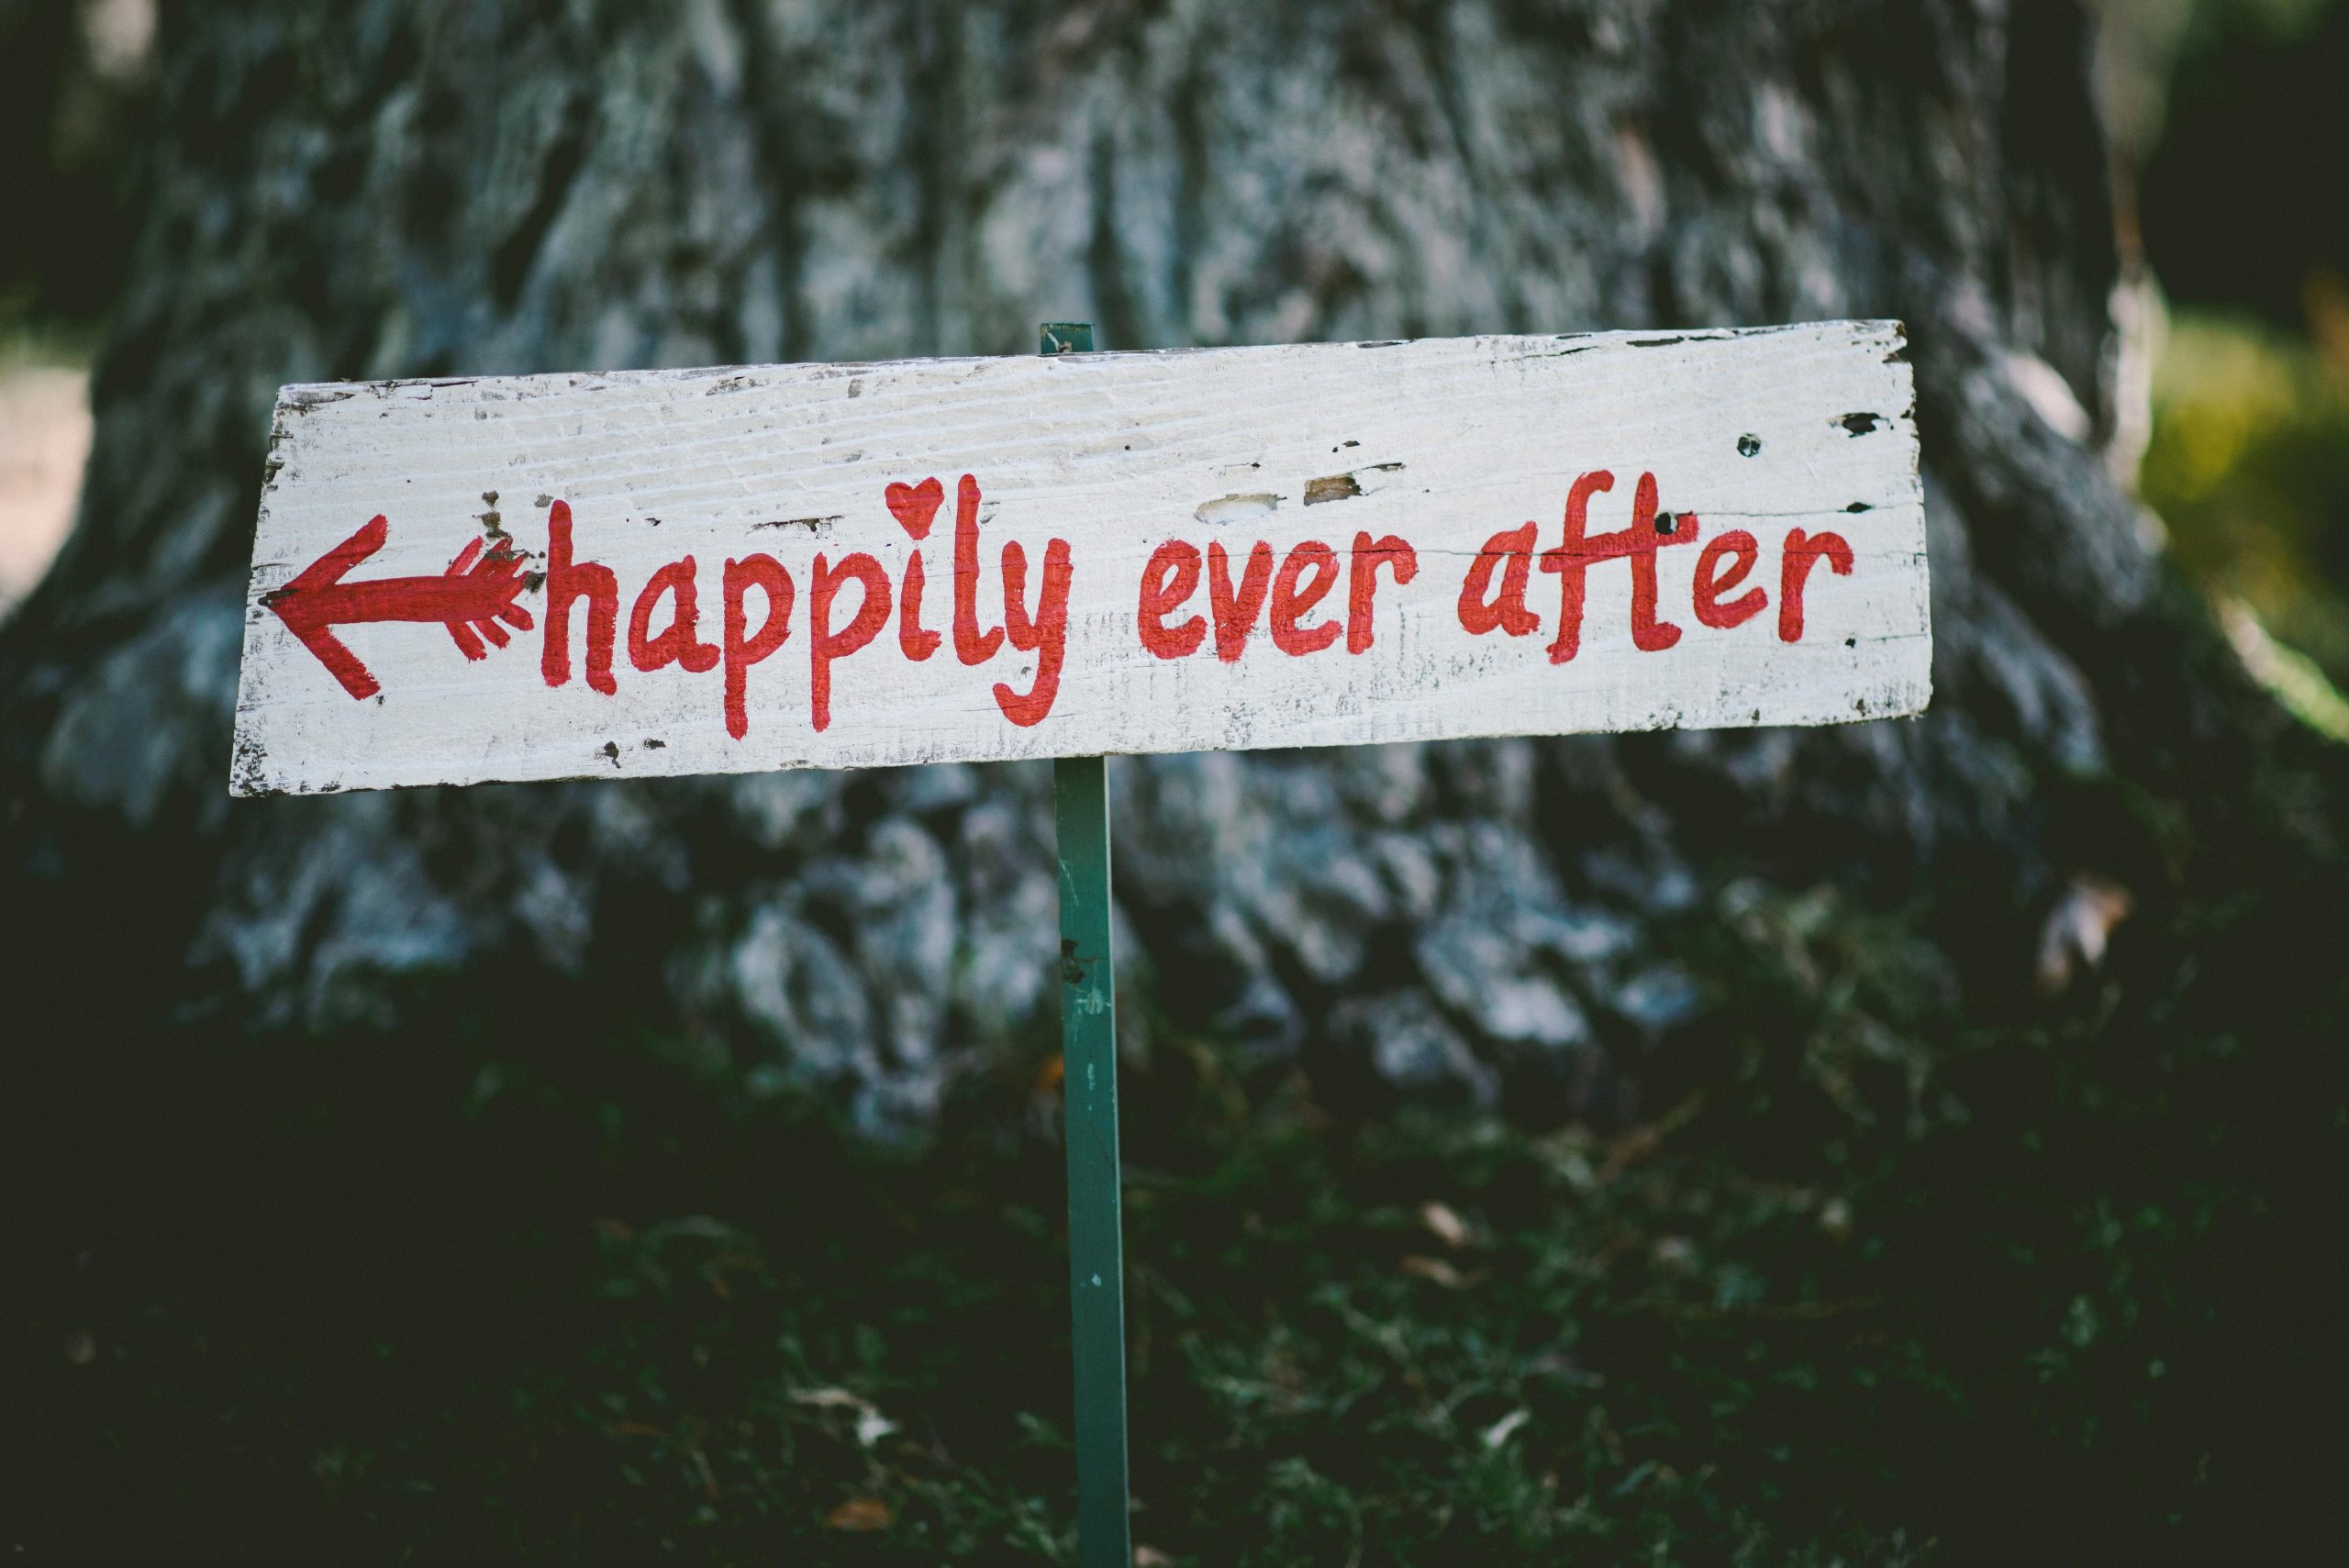 Sign that says "happily ever after"